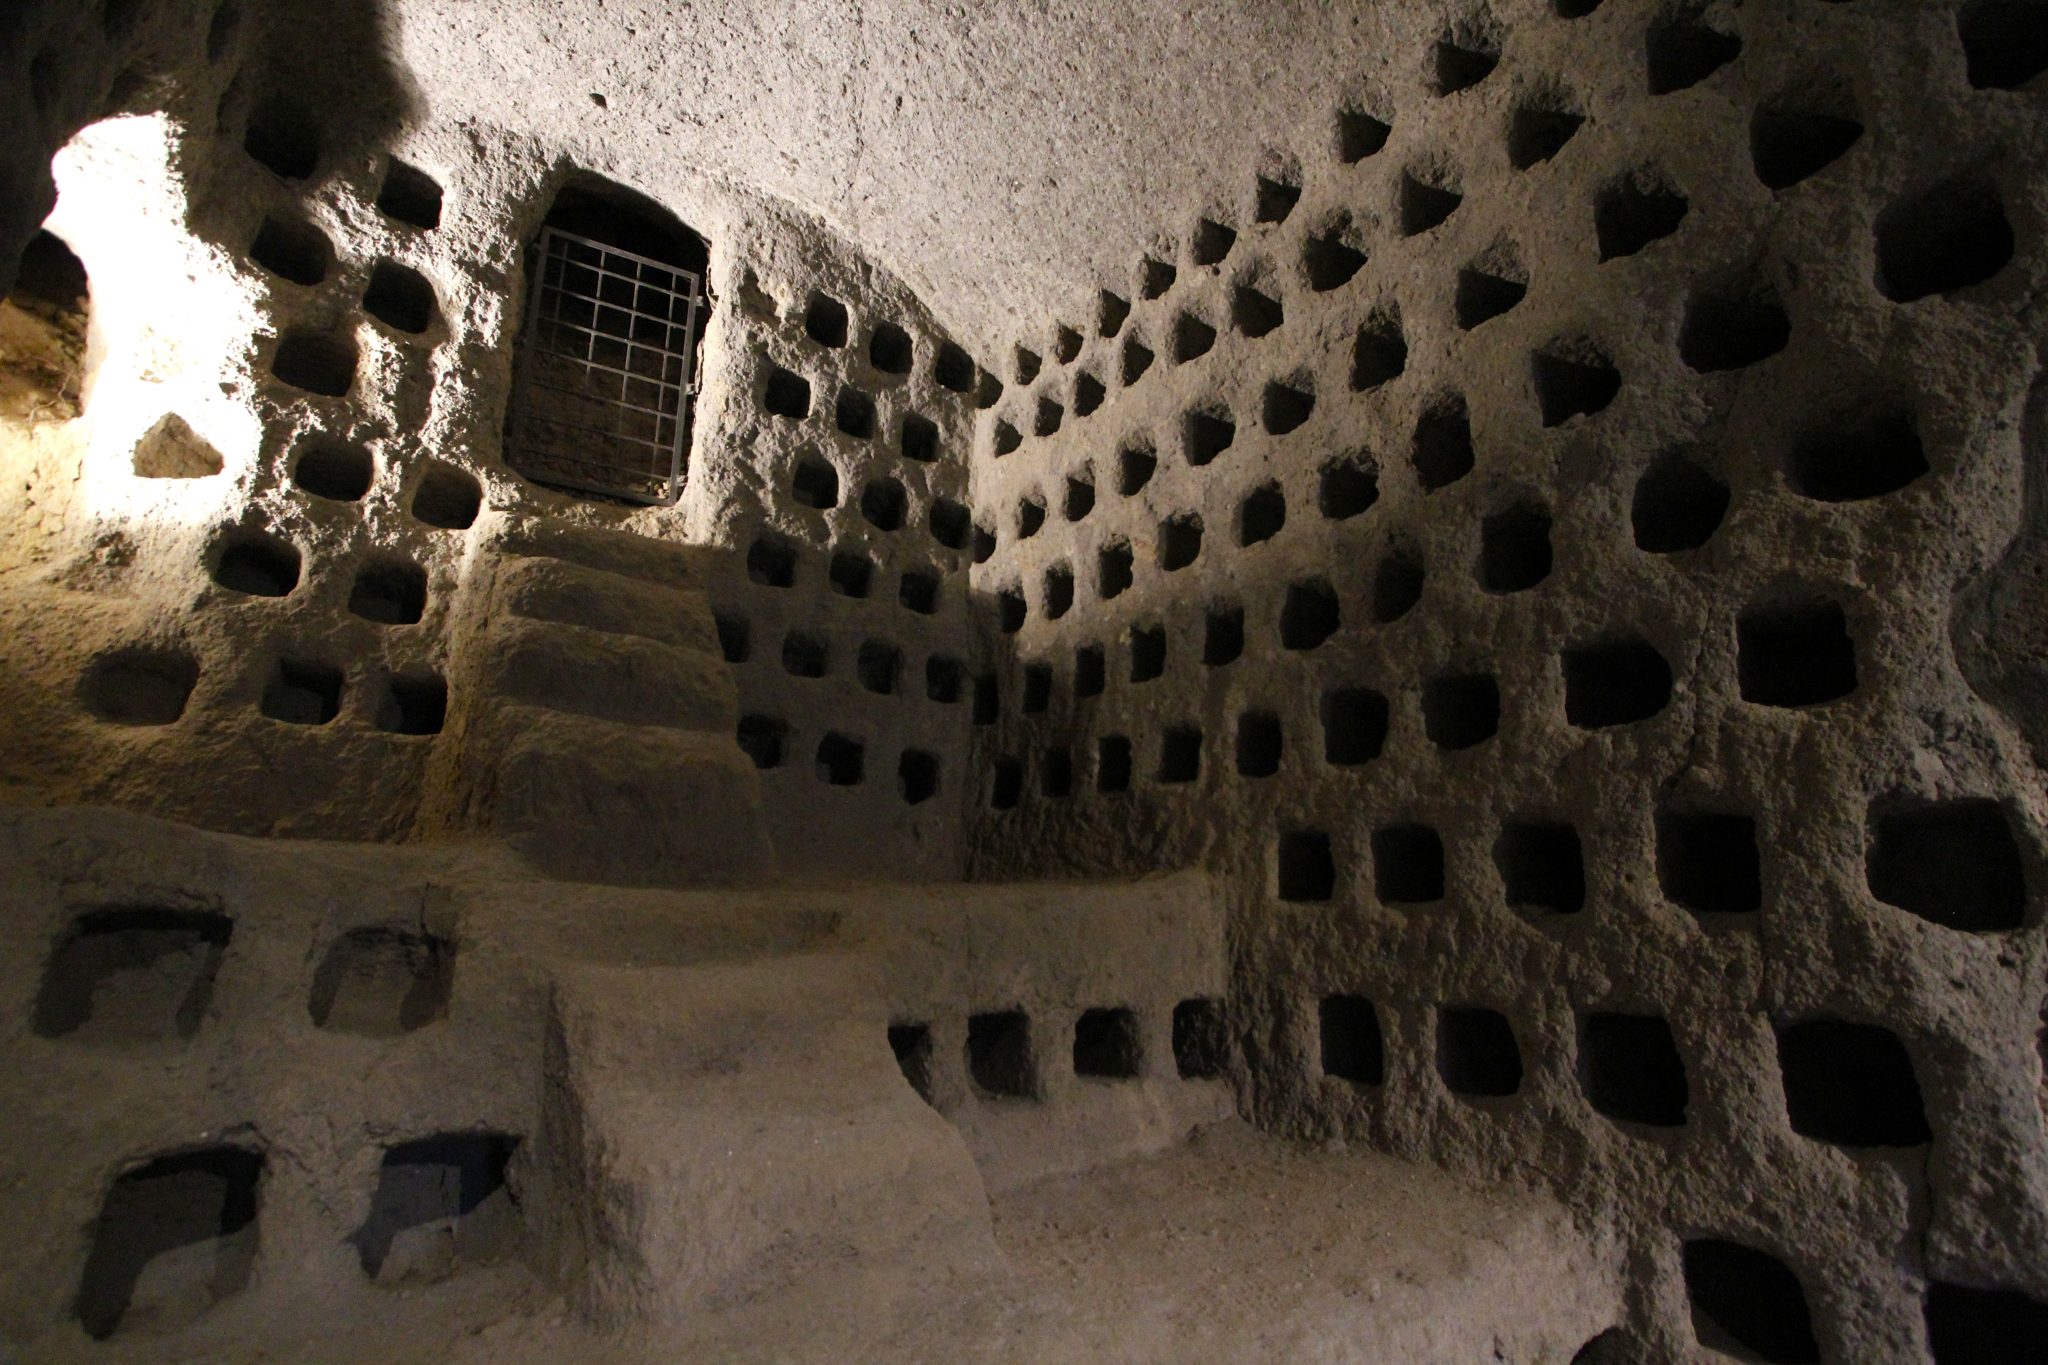 In medieval times, the people of Orvieto farmed pigeons. The holes in the volcanic tuff are nests